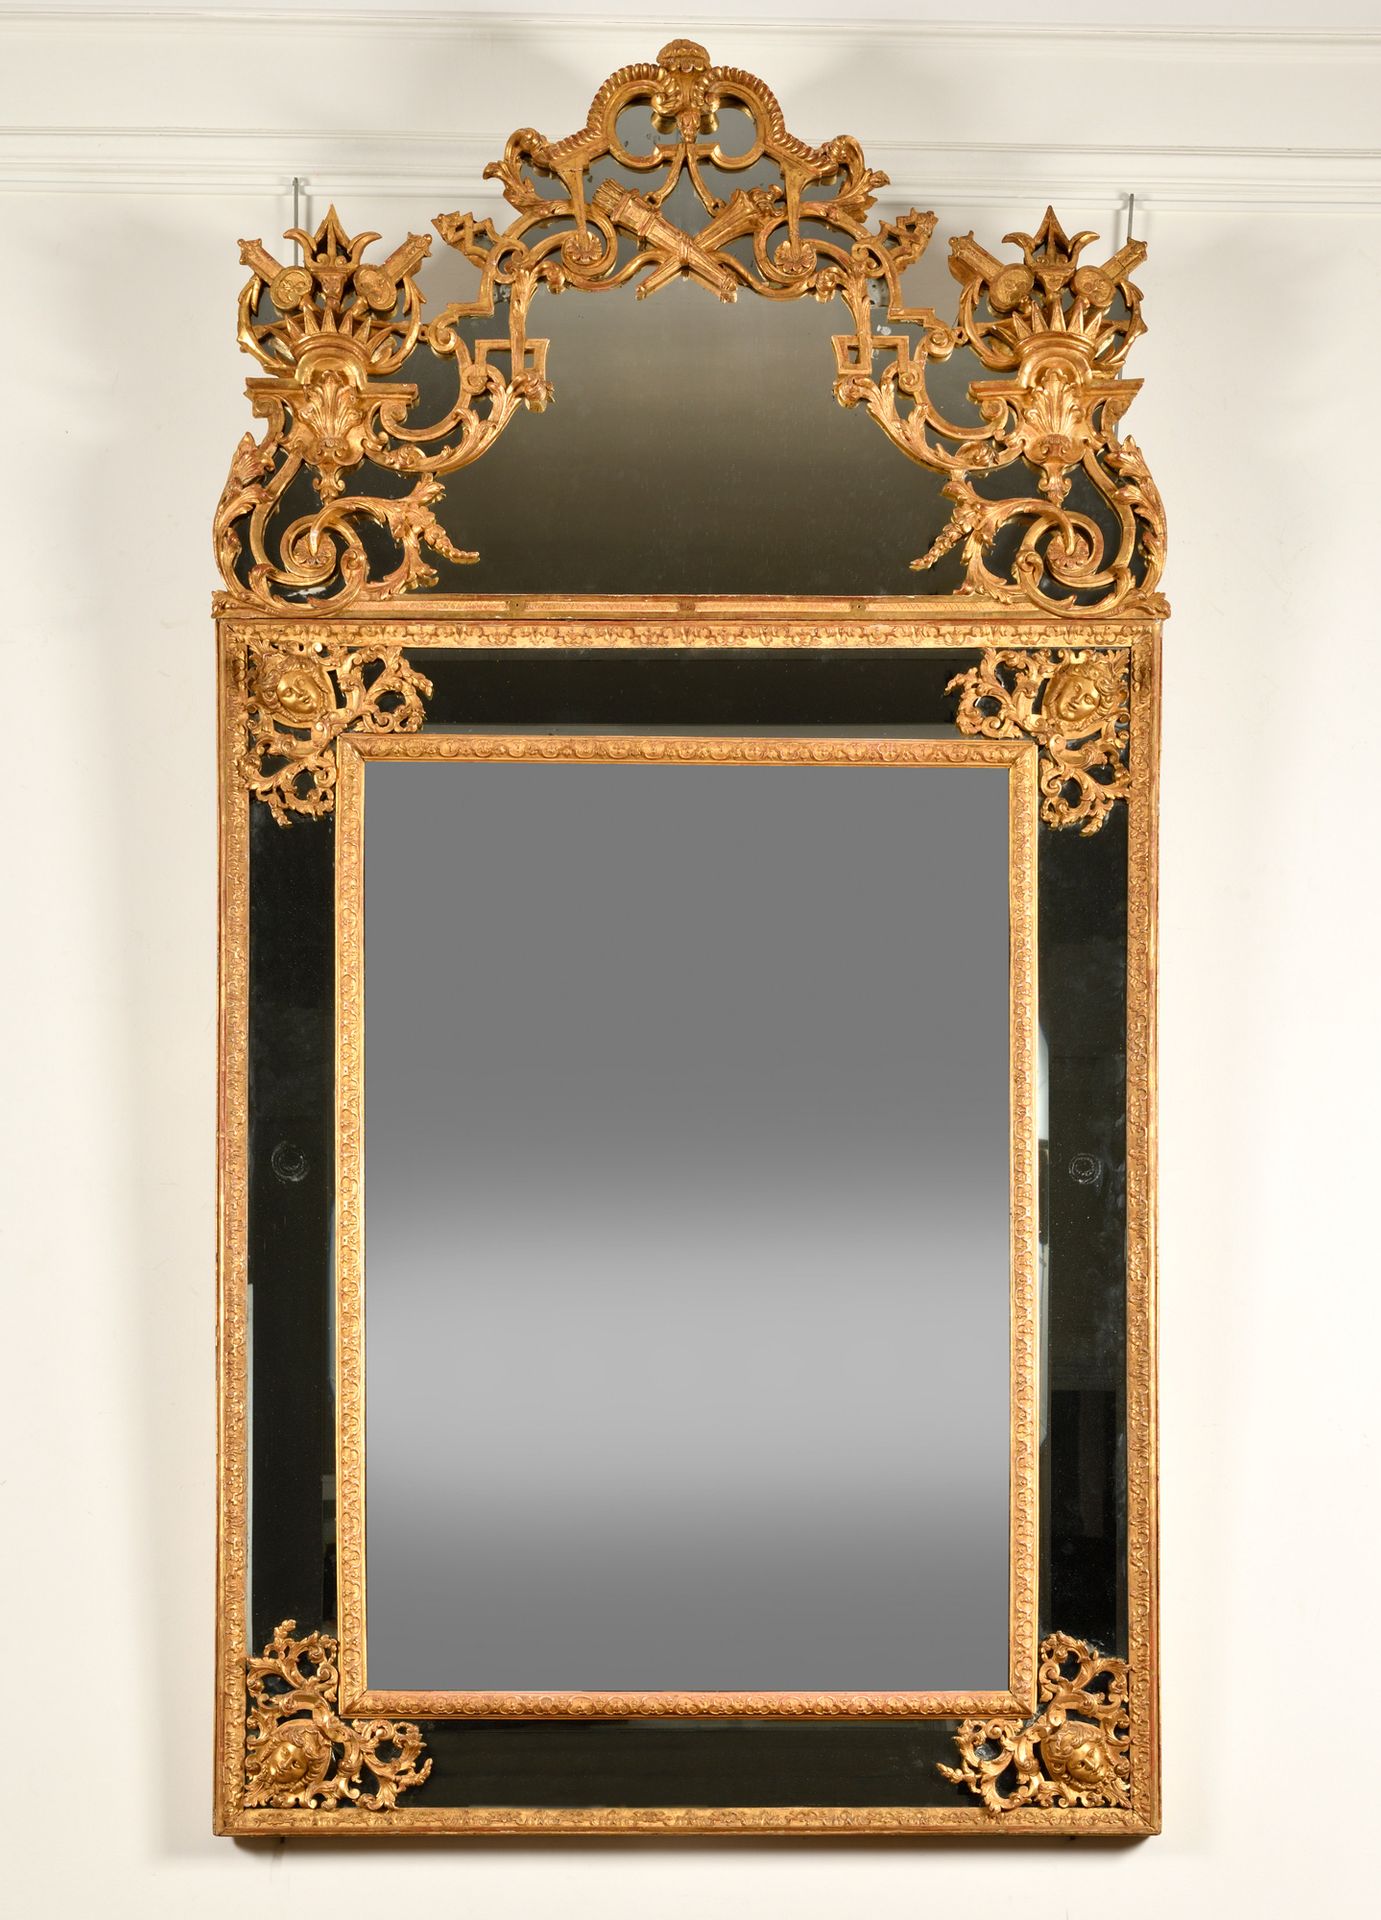 LARGE MIRROR with pediment and parecloses in gilded wood, molded and carved with&hellip;